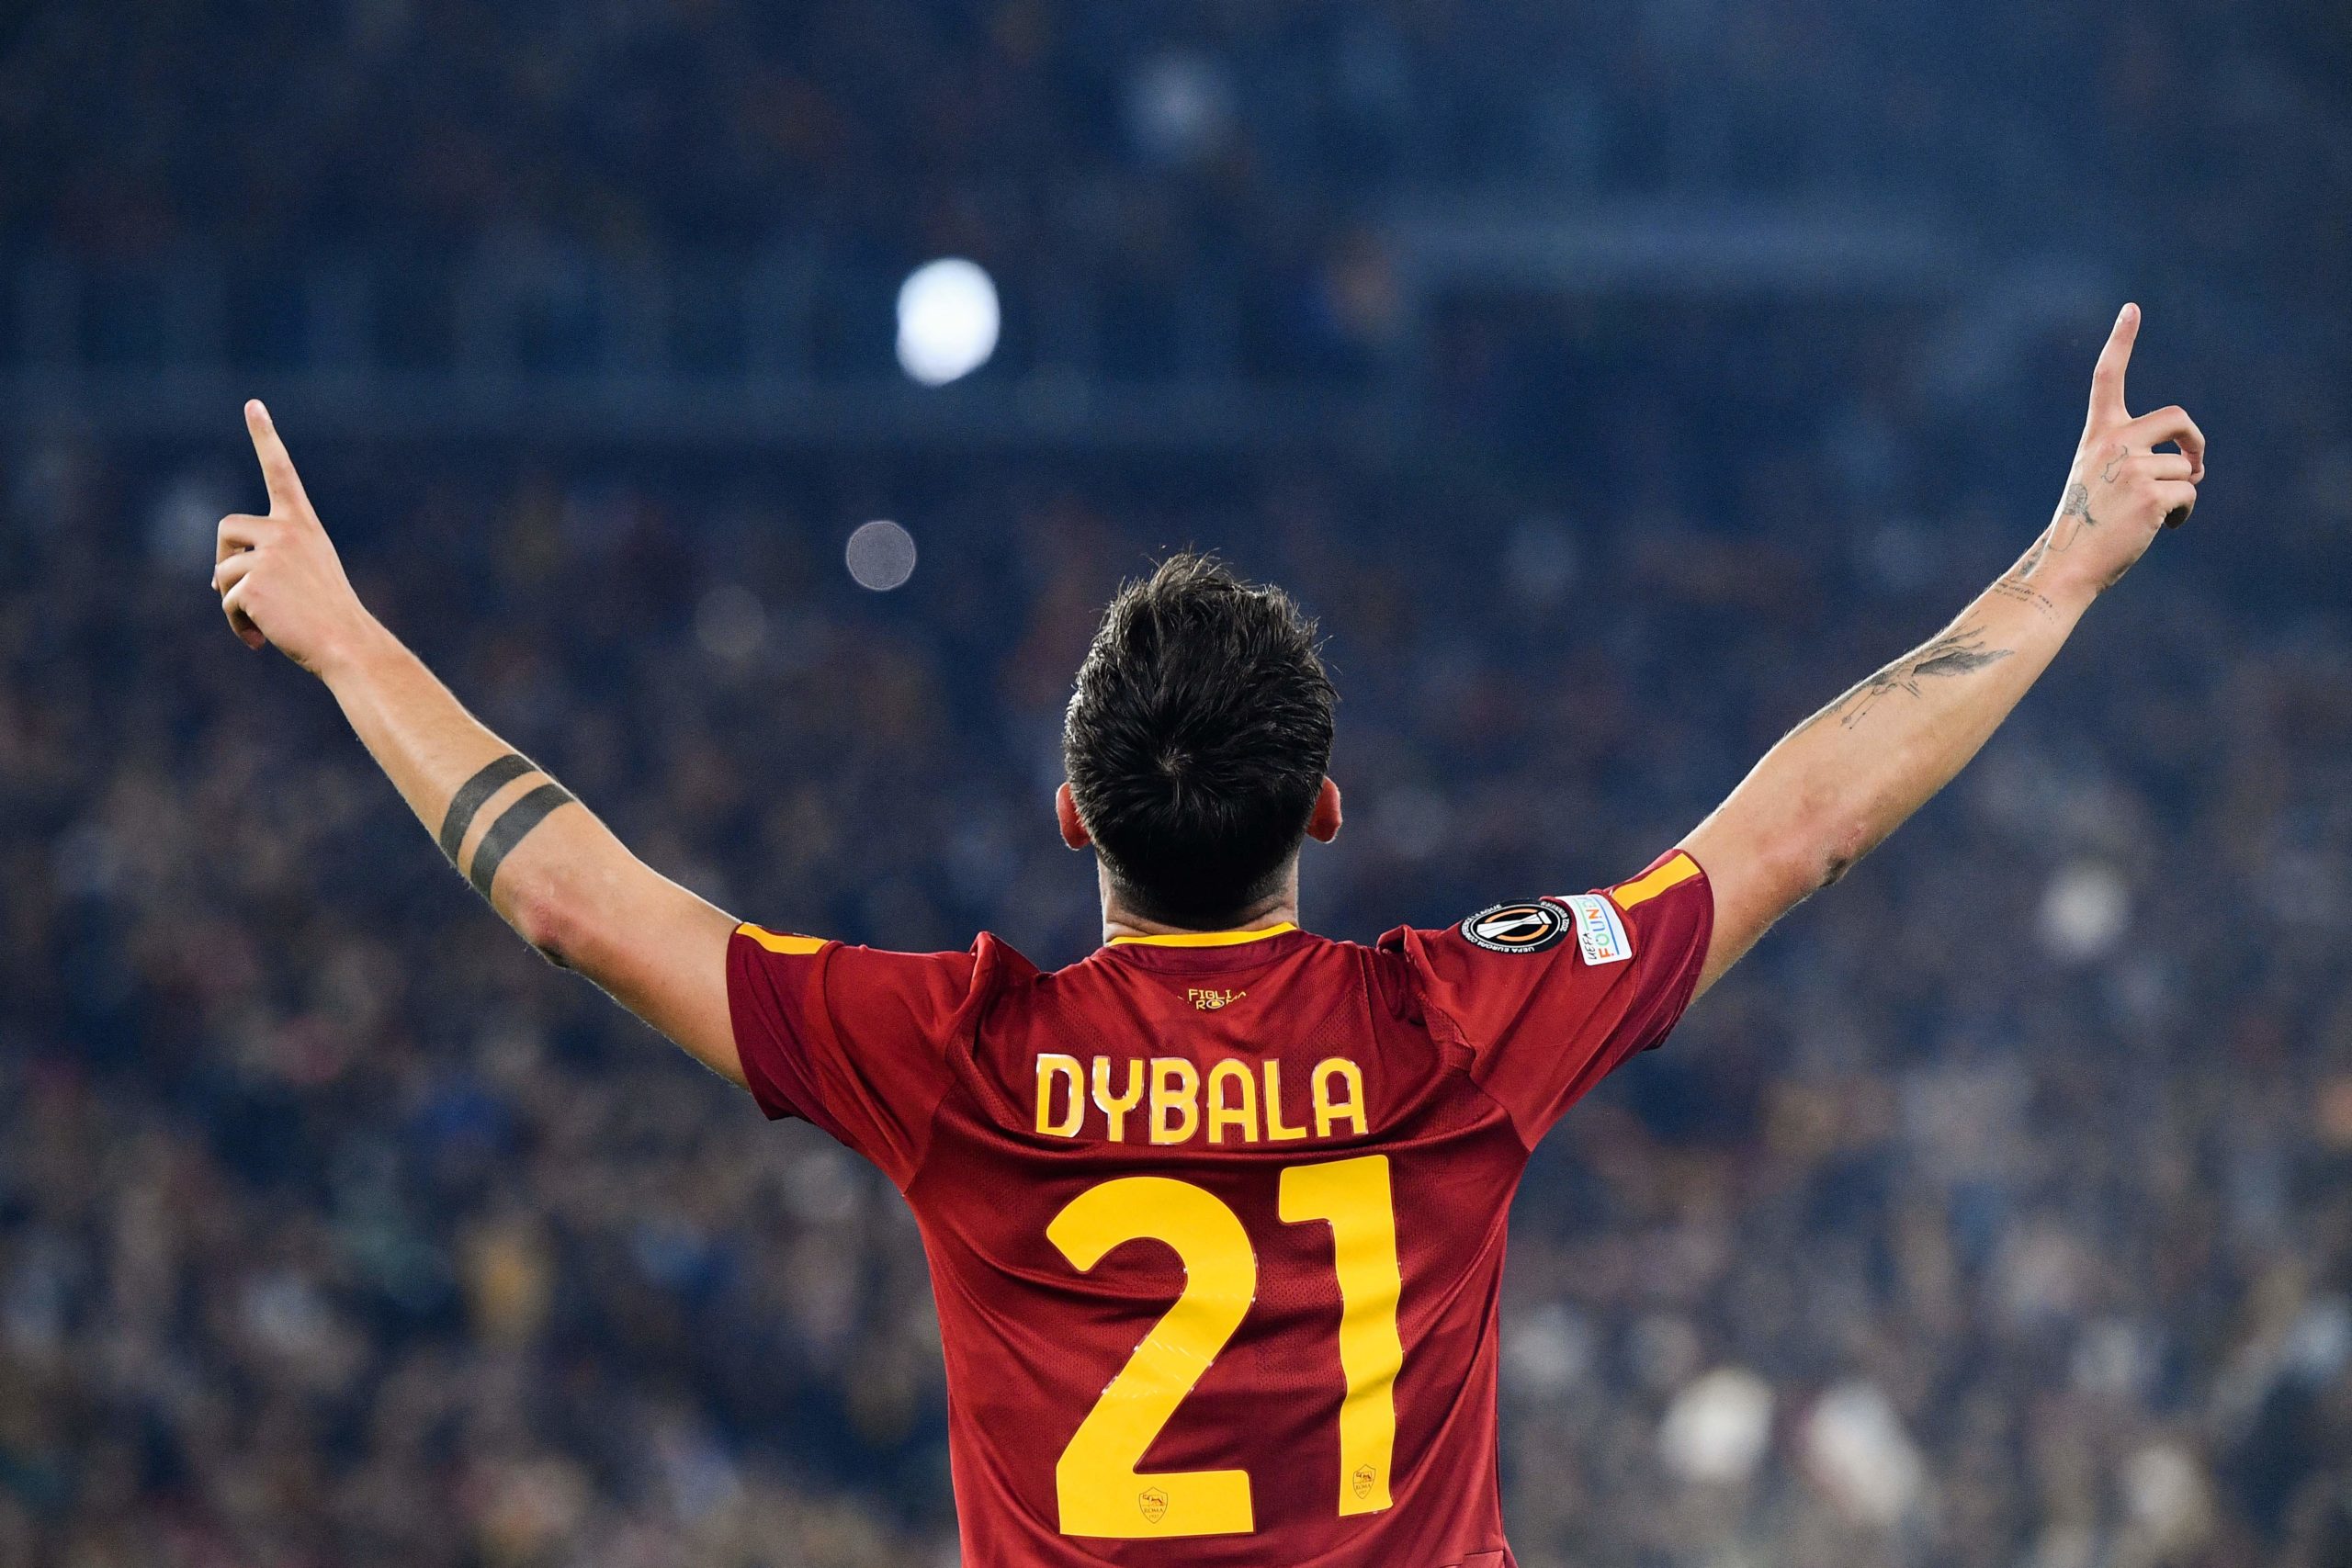 Paulo Dybala once again professed his love for Roma during an event. He hailed the warmth of their fans in particular: "The affection was incredible."